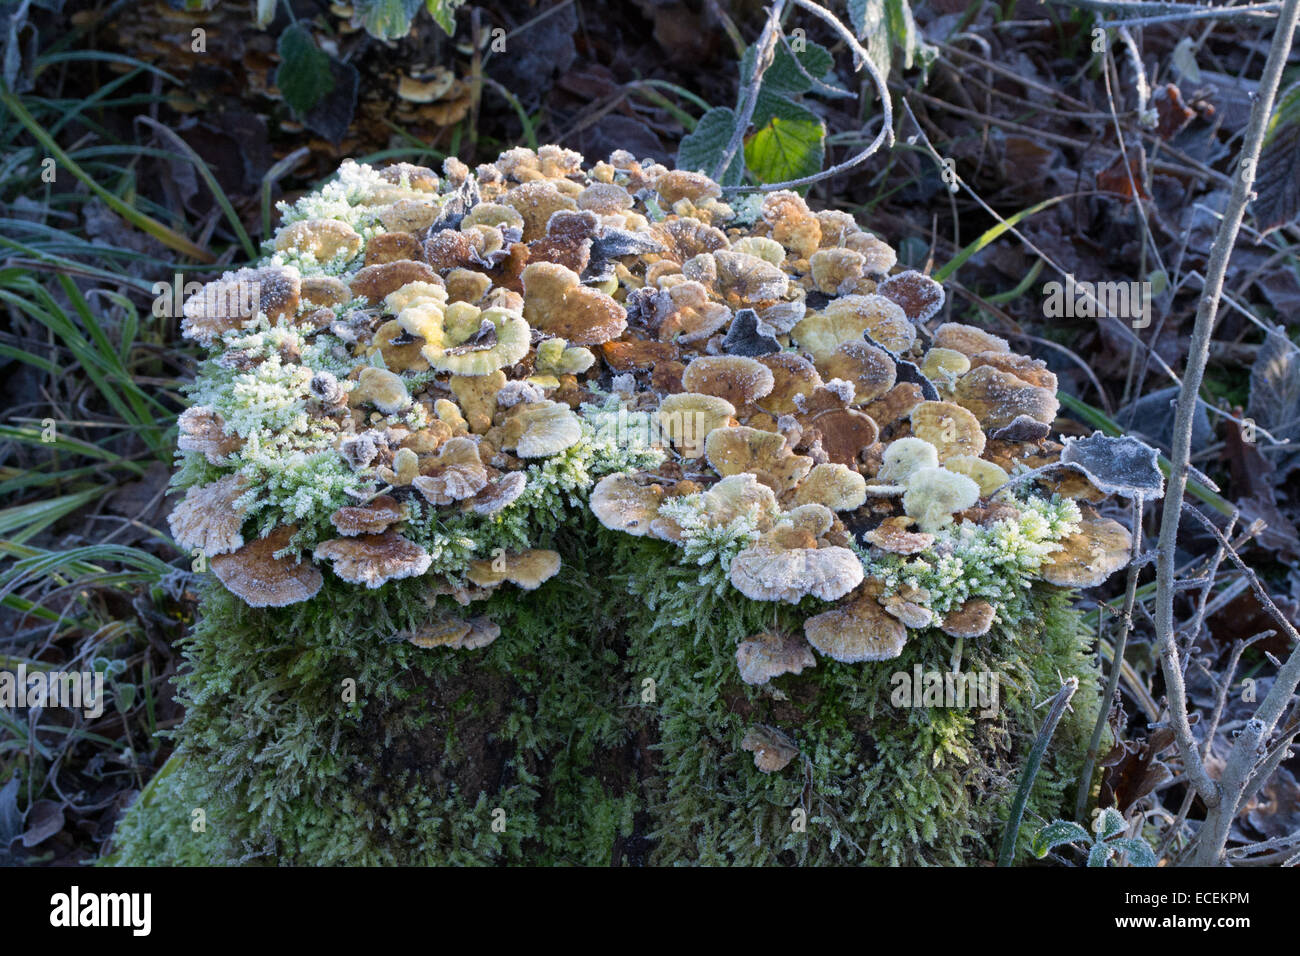 Close-up study in the early morning sunshine of fungi growing on a rotting tree stump in a woodland setting Stock Photo